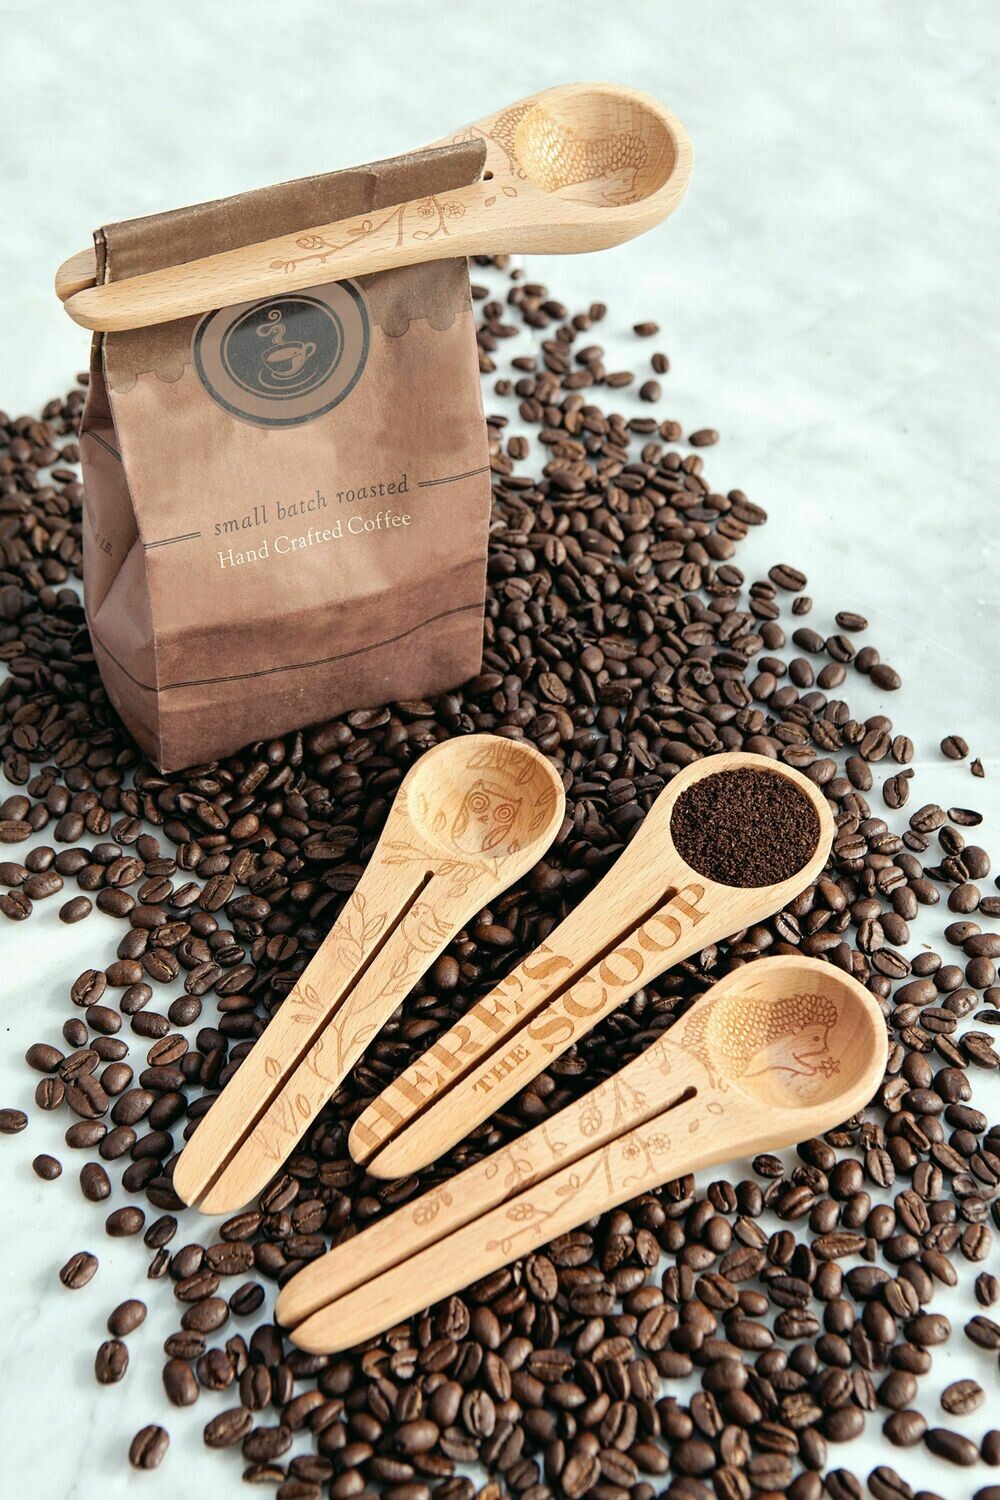 Woodland Coffee Scoop and Clip